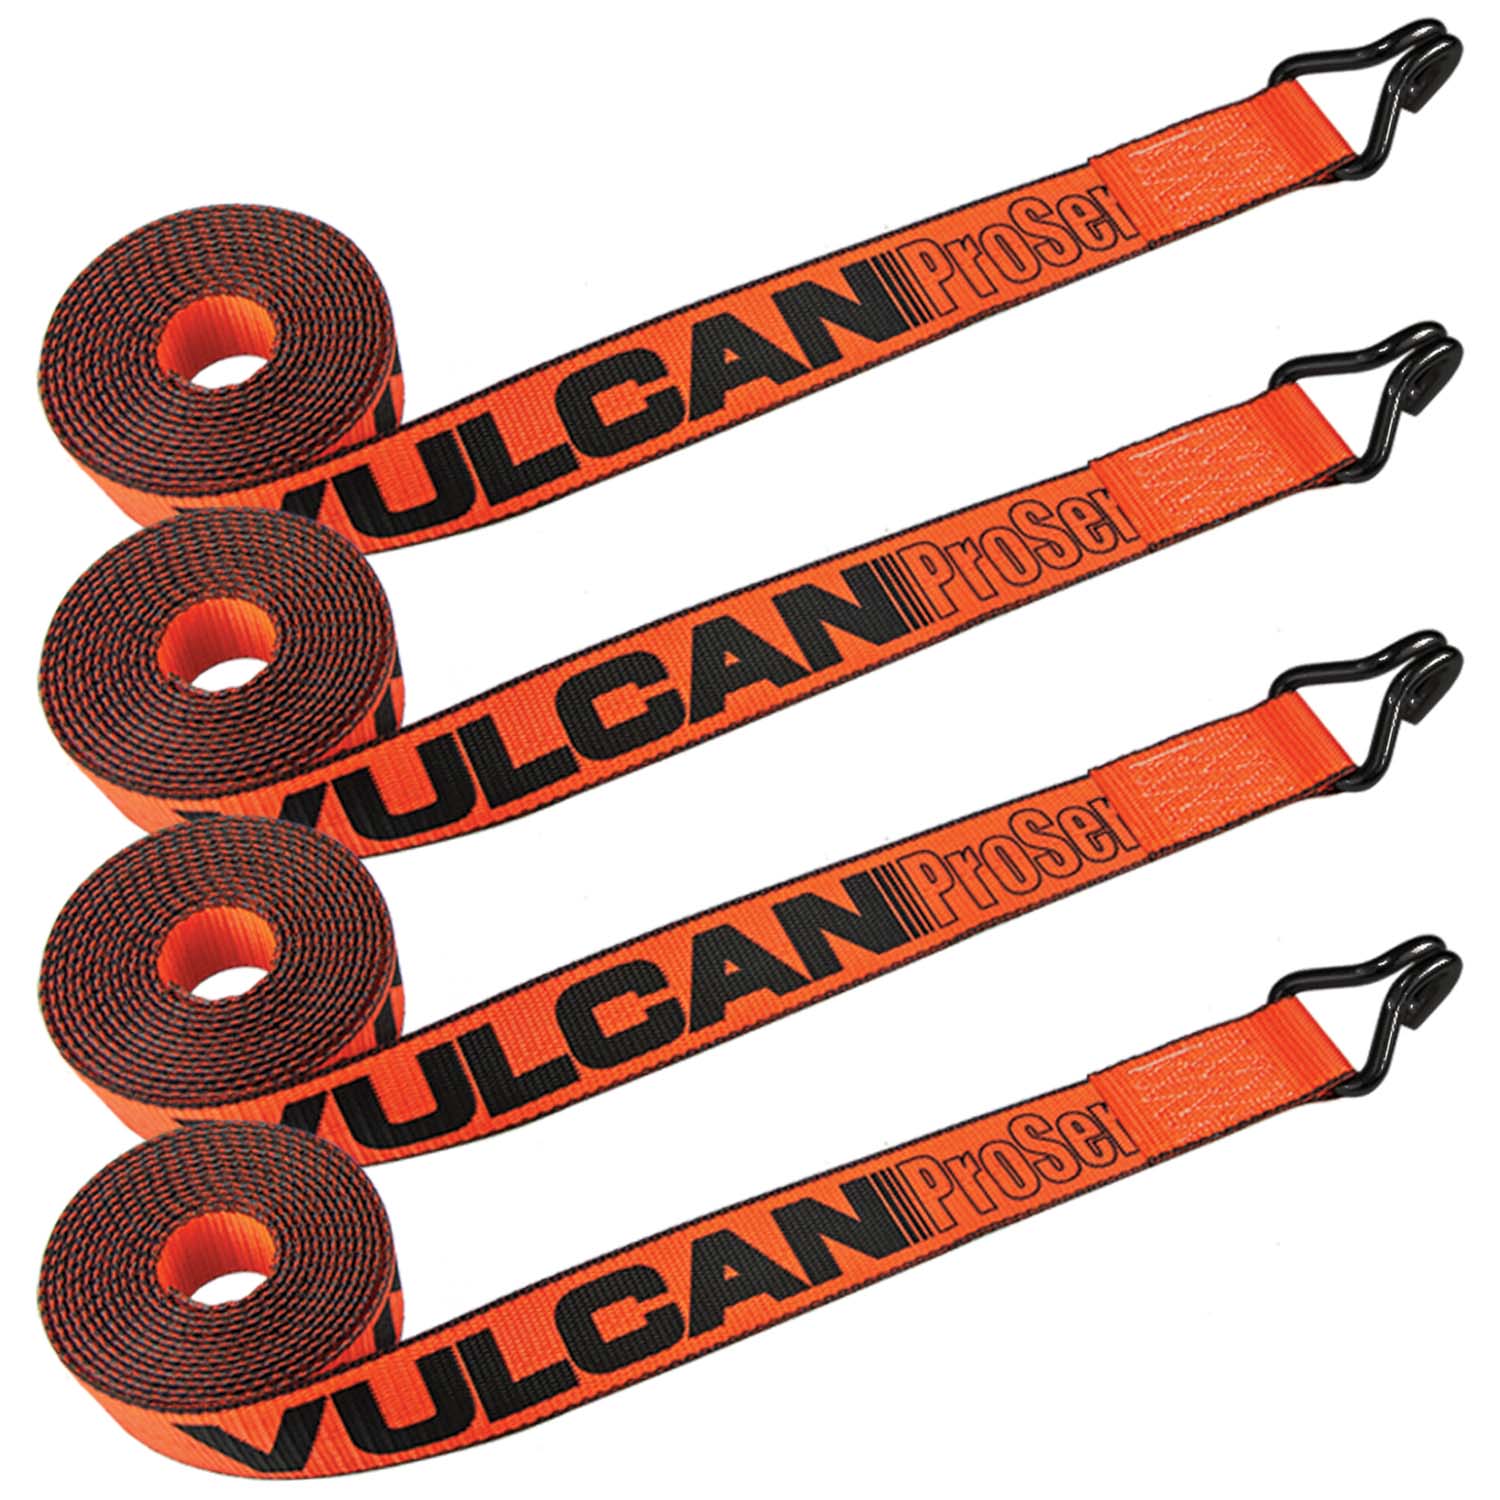 Canac Ratchet Straps 1 in. x 15 ft. (4-Pack) - Canac